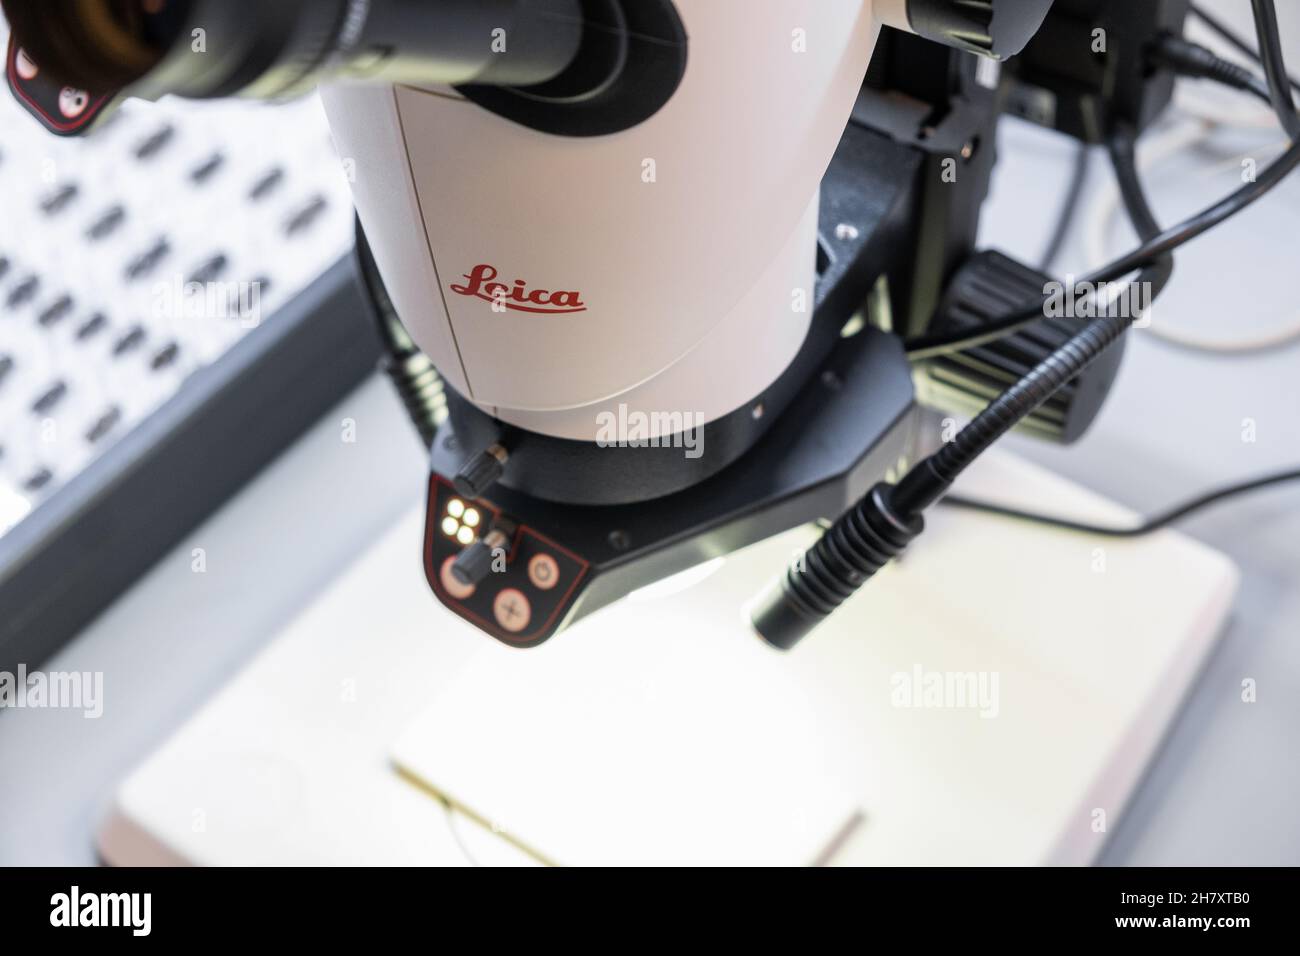 Leica microscope for biochemical, cell biology analysis with specimens on the background, November 2021, San Francisco, USA. Stock Photo